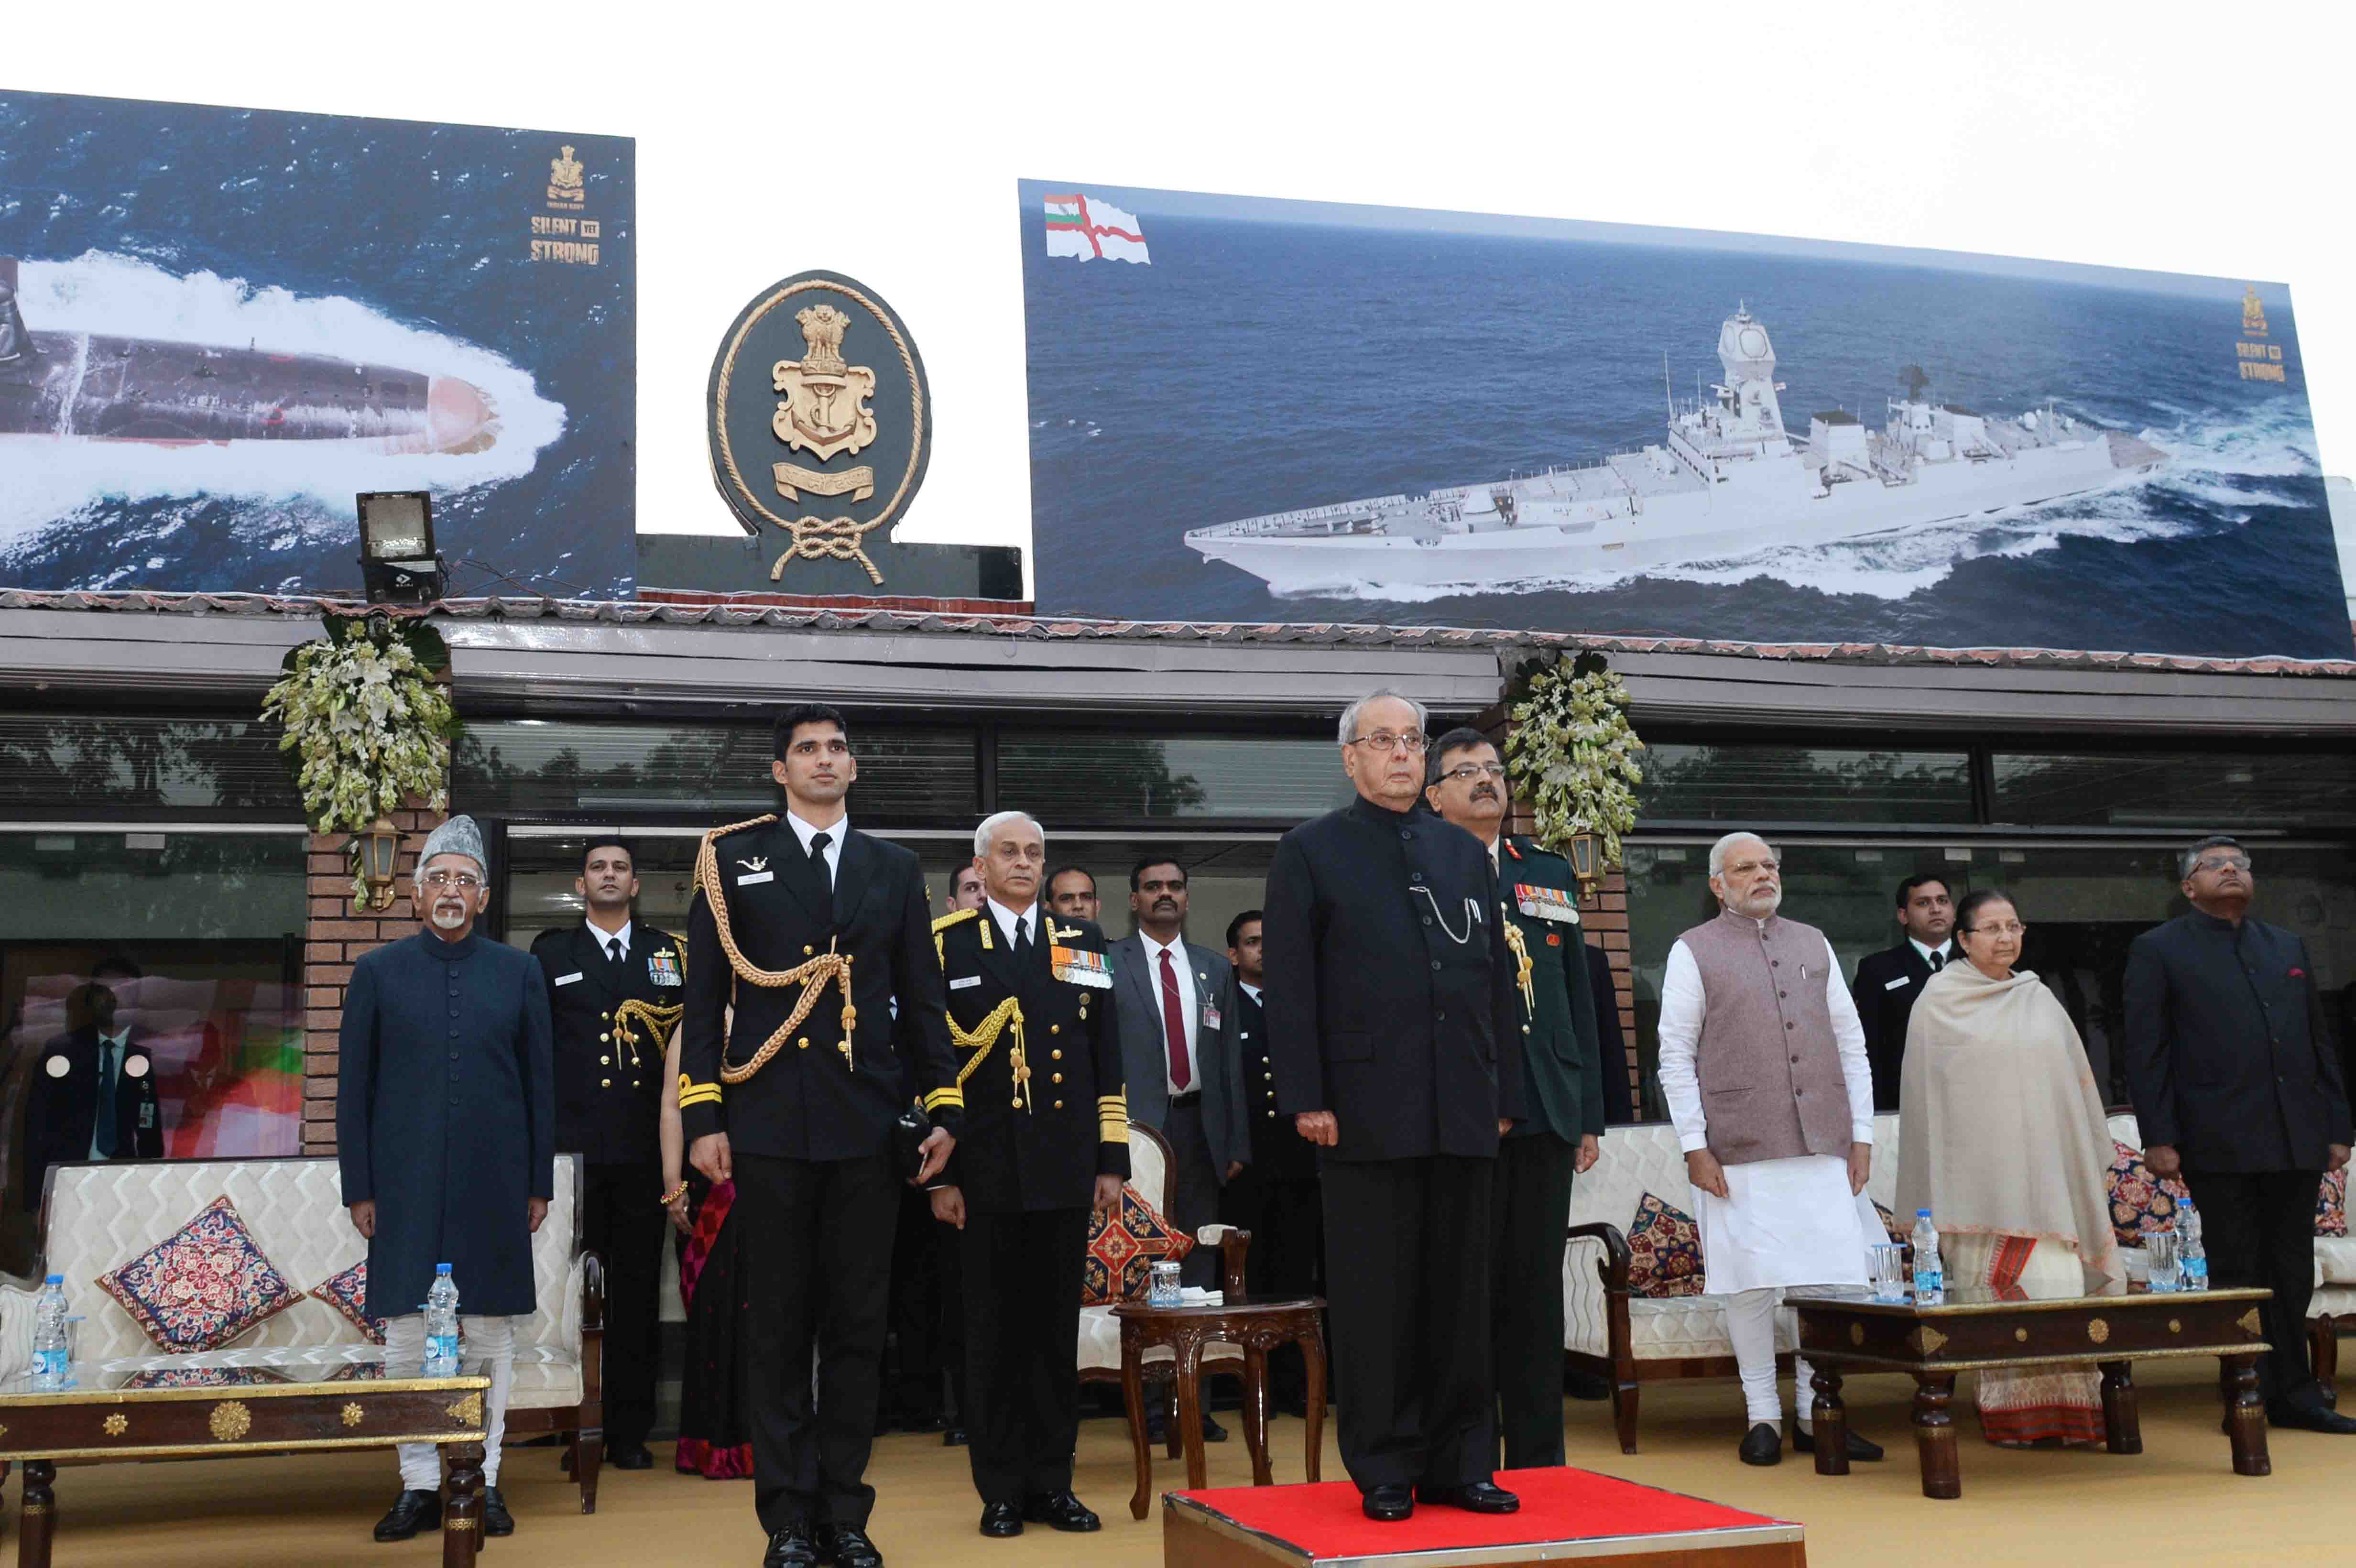 The President of India, Shri Pranab Mukherjee attending the Navy Day Reception hosted by the Chief of the Naval Staff at Navy House in New Delhi on December 4, 2016.